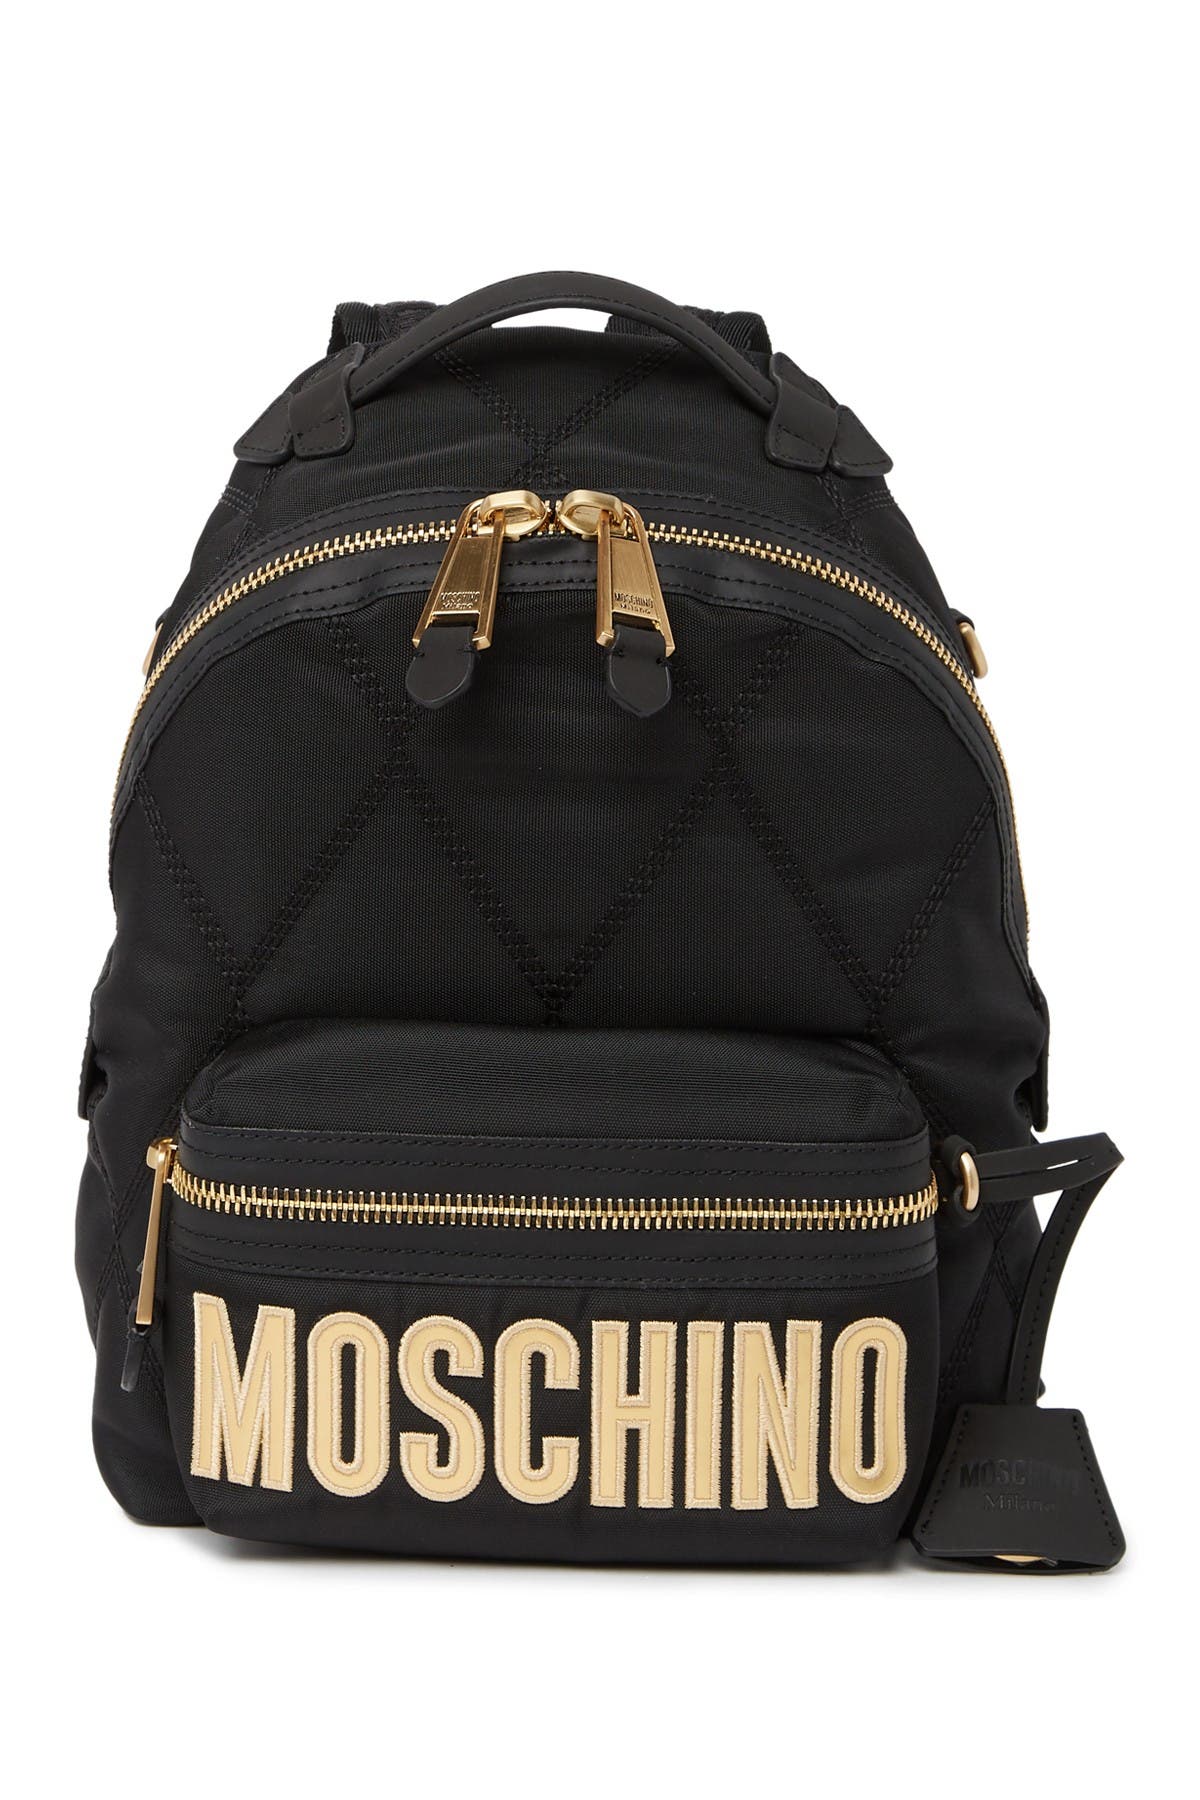 MOSCHINO | Solid Backpack | Nordstrom Rack